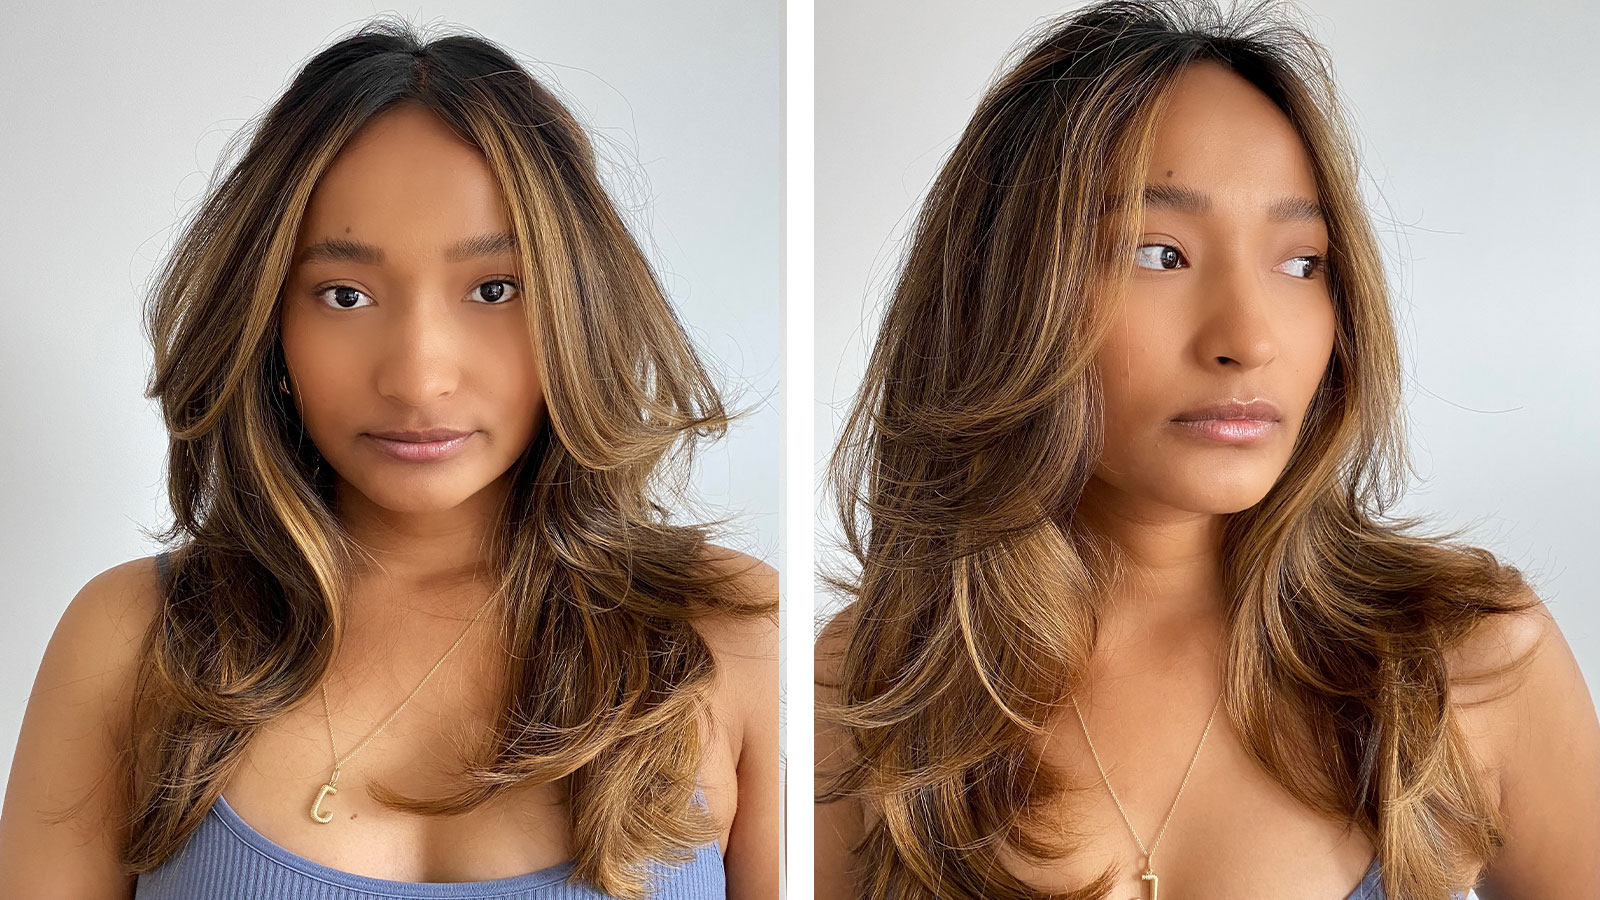 How To Do A Bouncy Blowdry At Home - Beauty Bay Edited